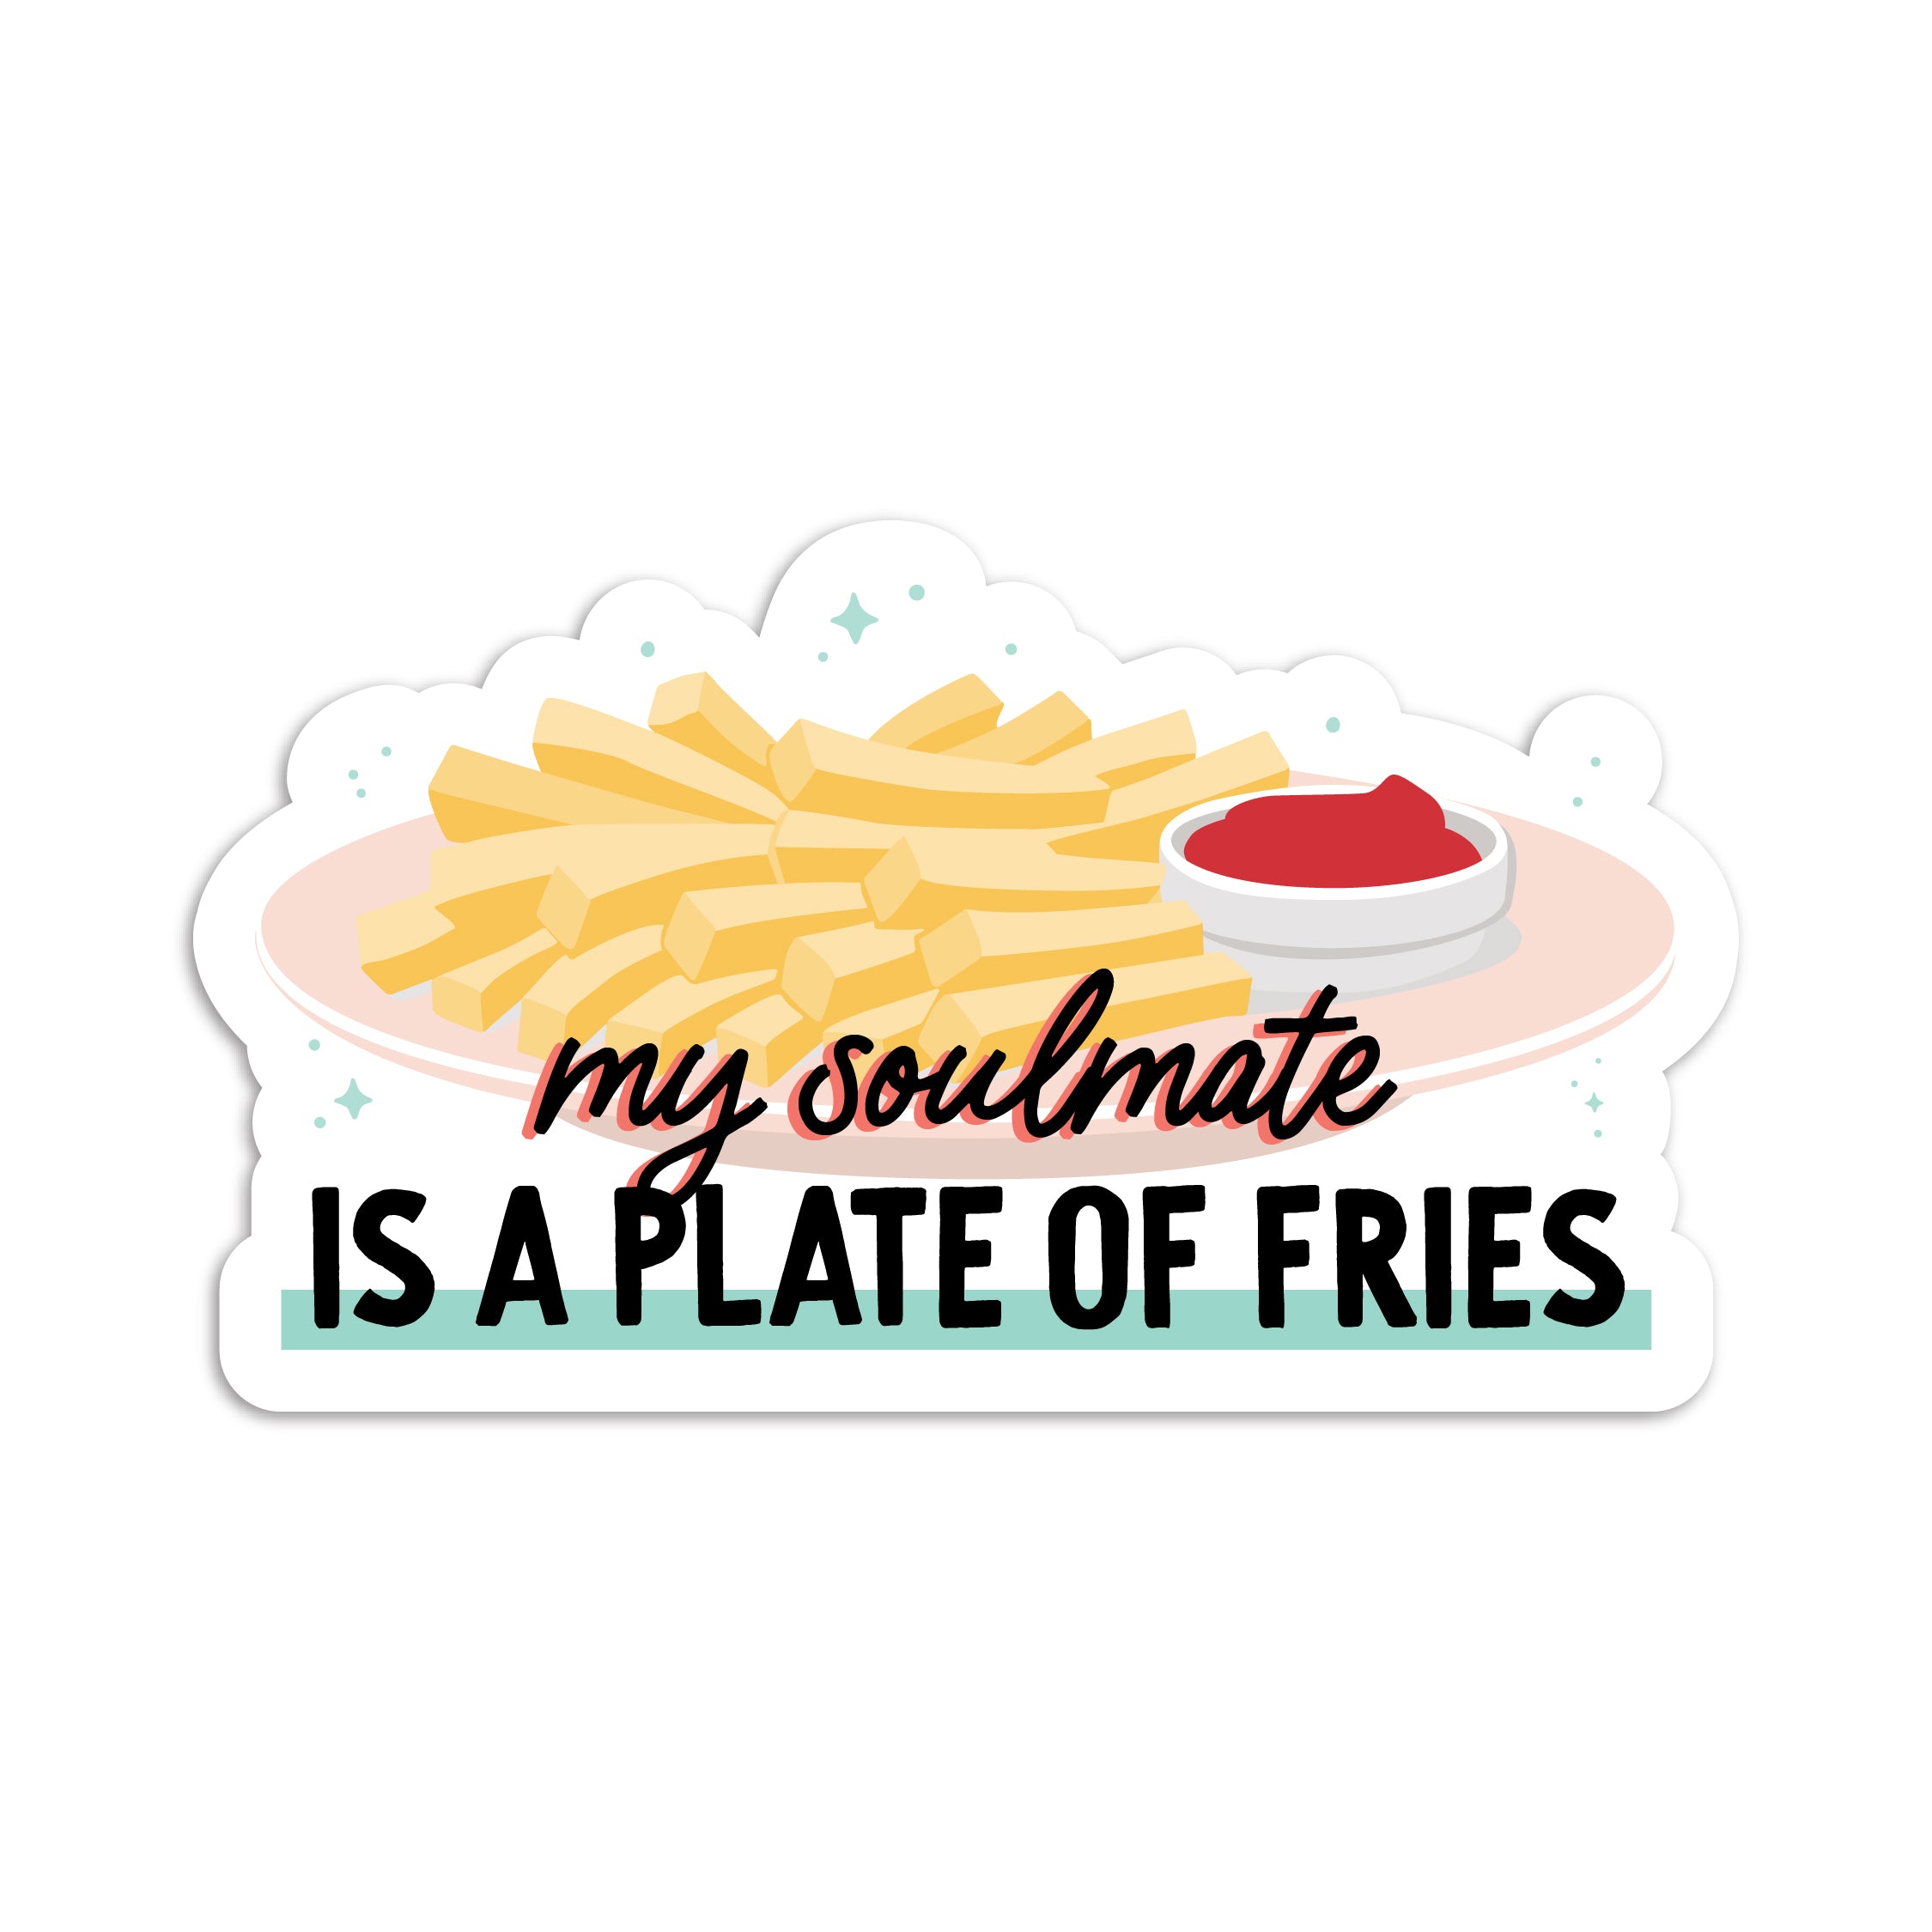 My soulmate is a plate of fries vinyl sticker by I&